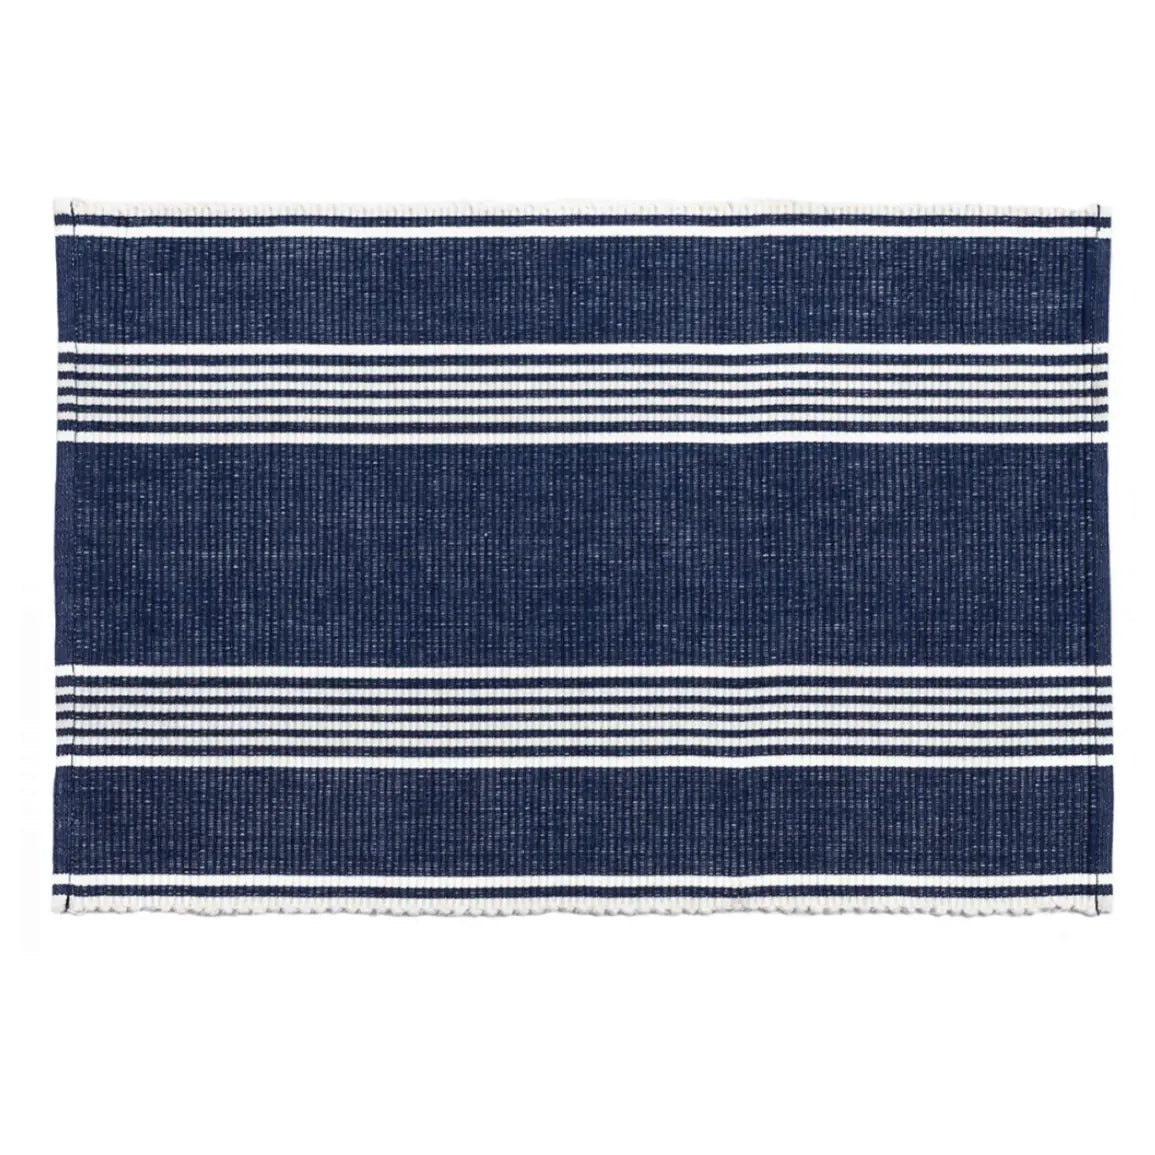 Home Smith Bistro Stripe Indigo Placemats - Set of 4 Annie Selke Placemats and Tablerunners